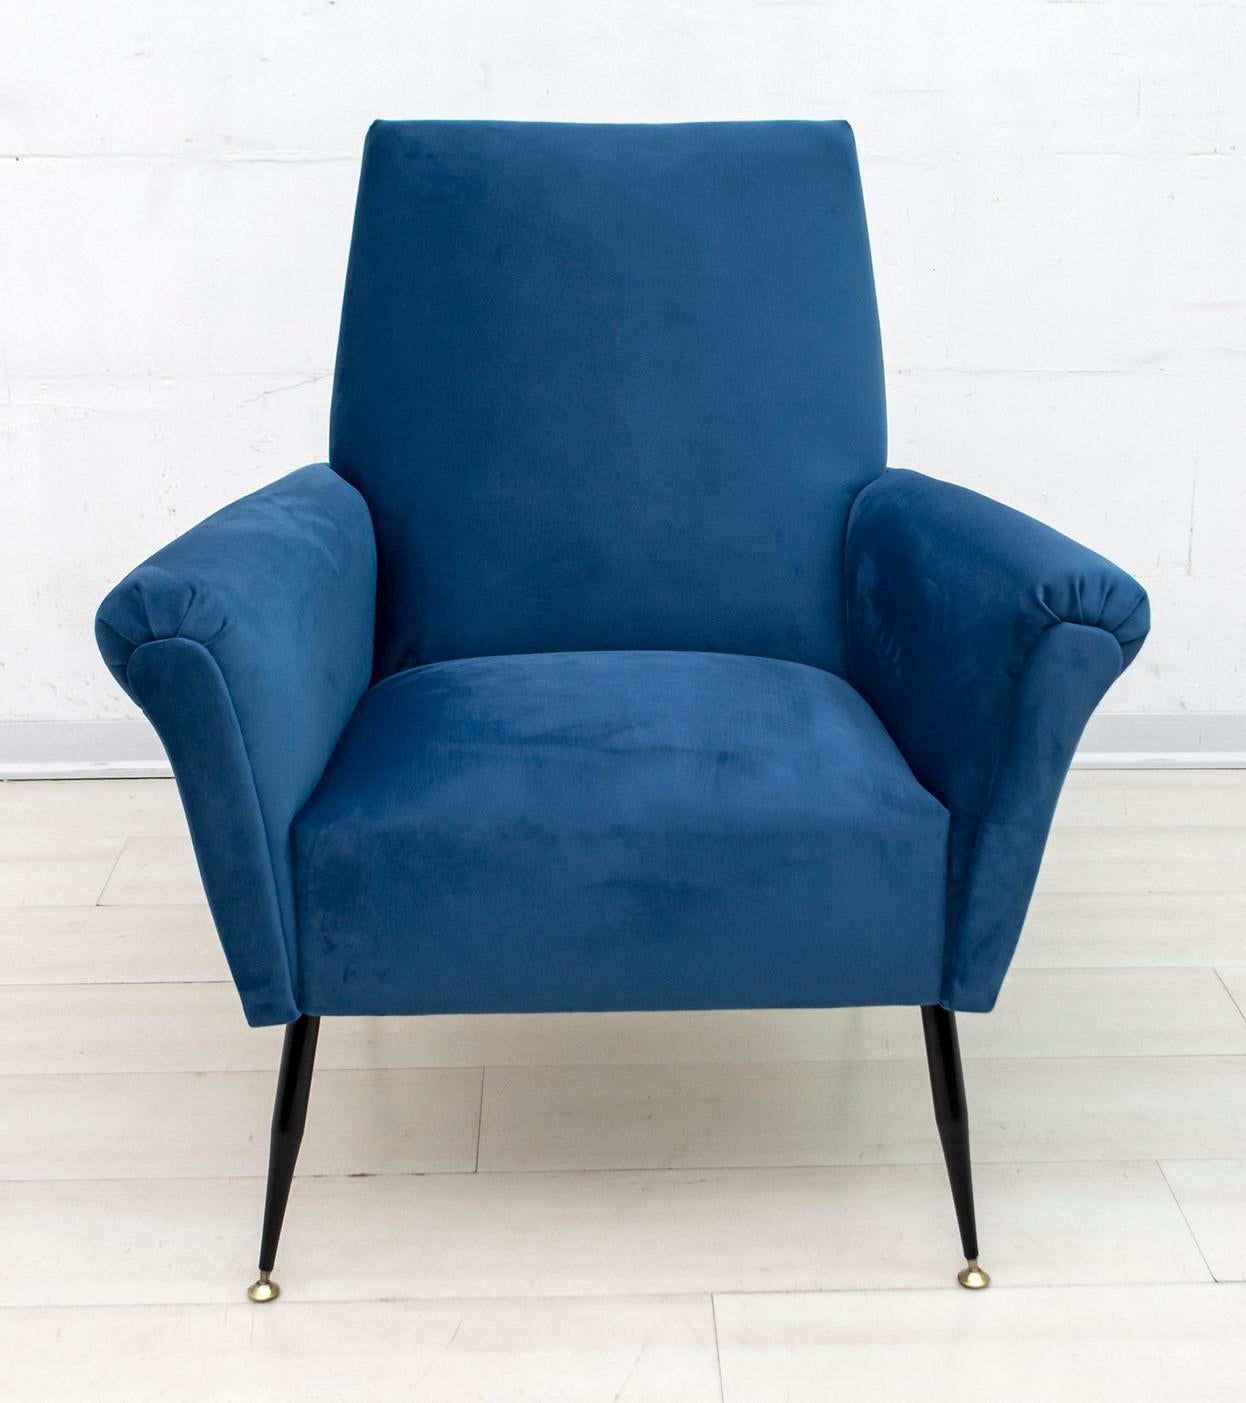 Armchair with an Italian design from the 1950s, the armchair has been restored and upholstered in blue velvet.